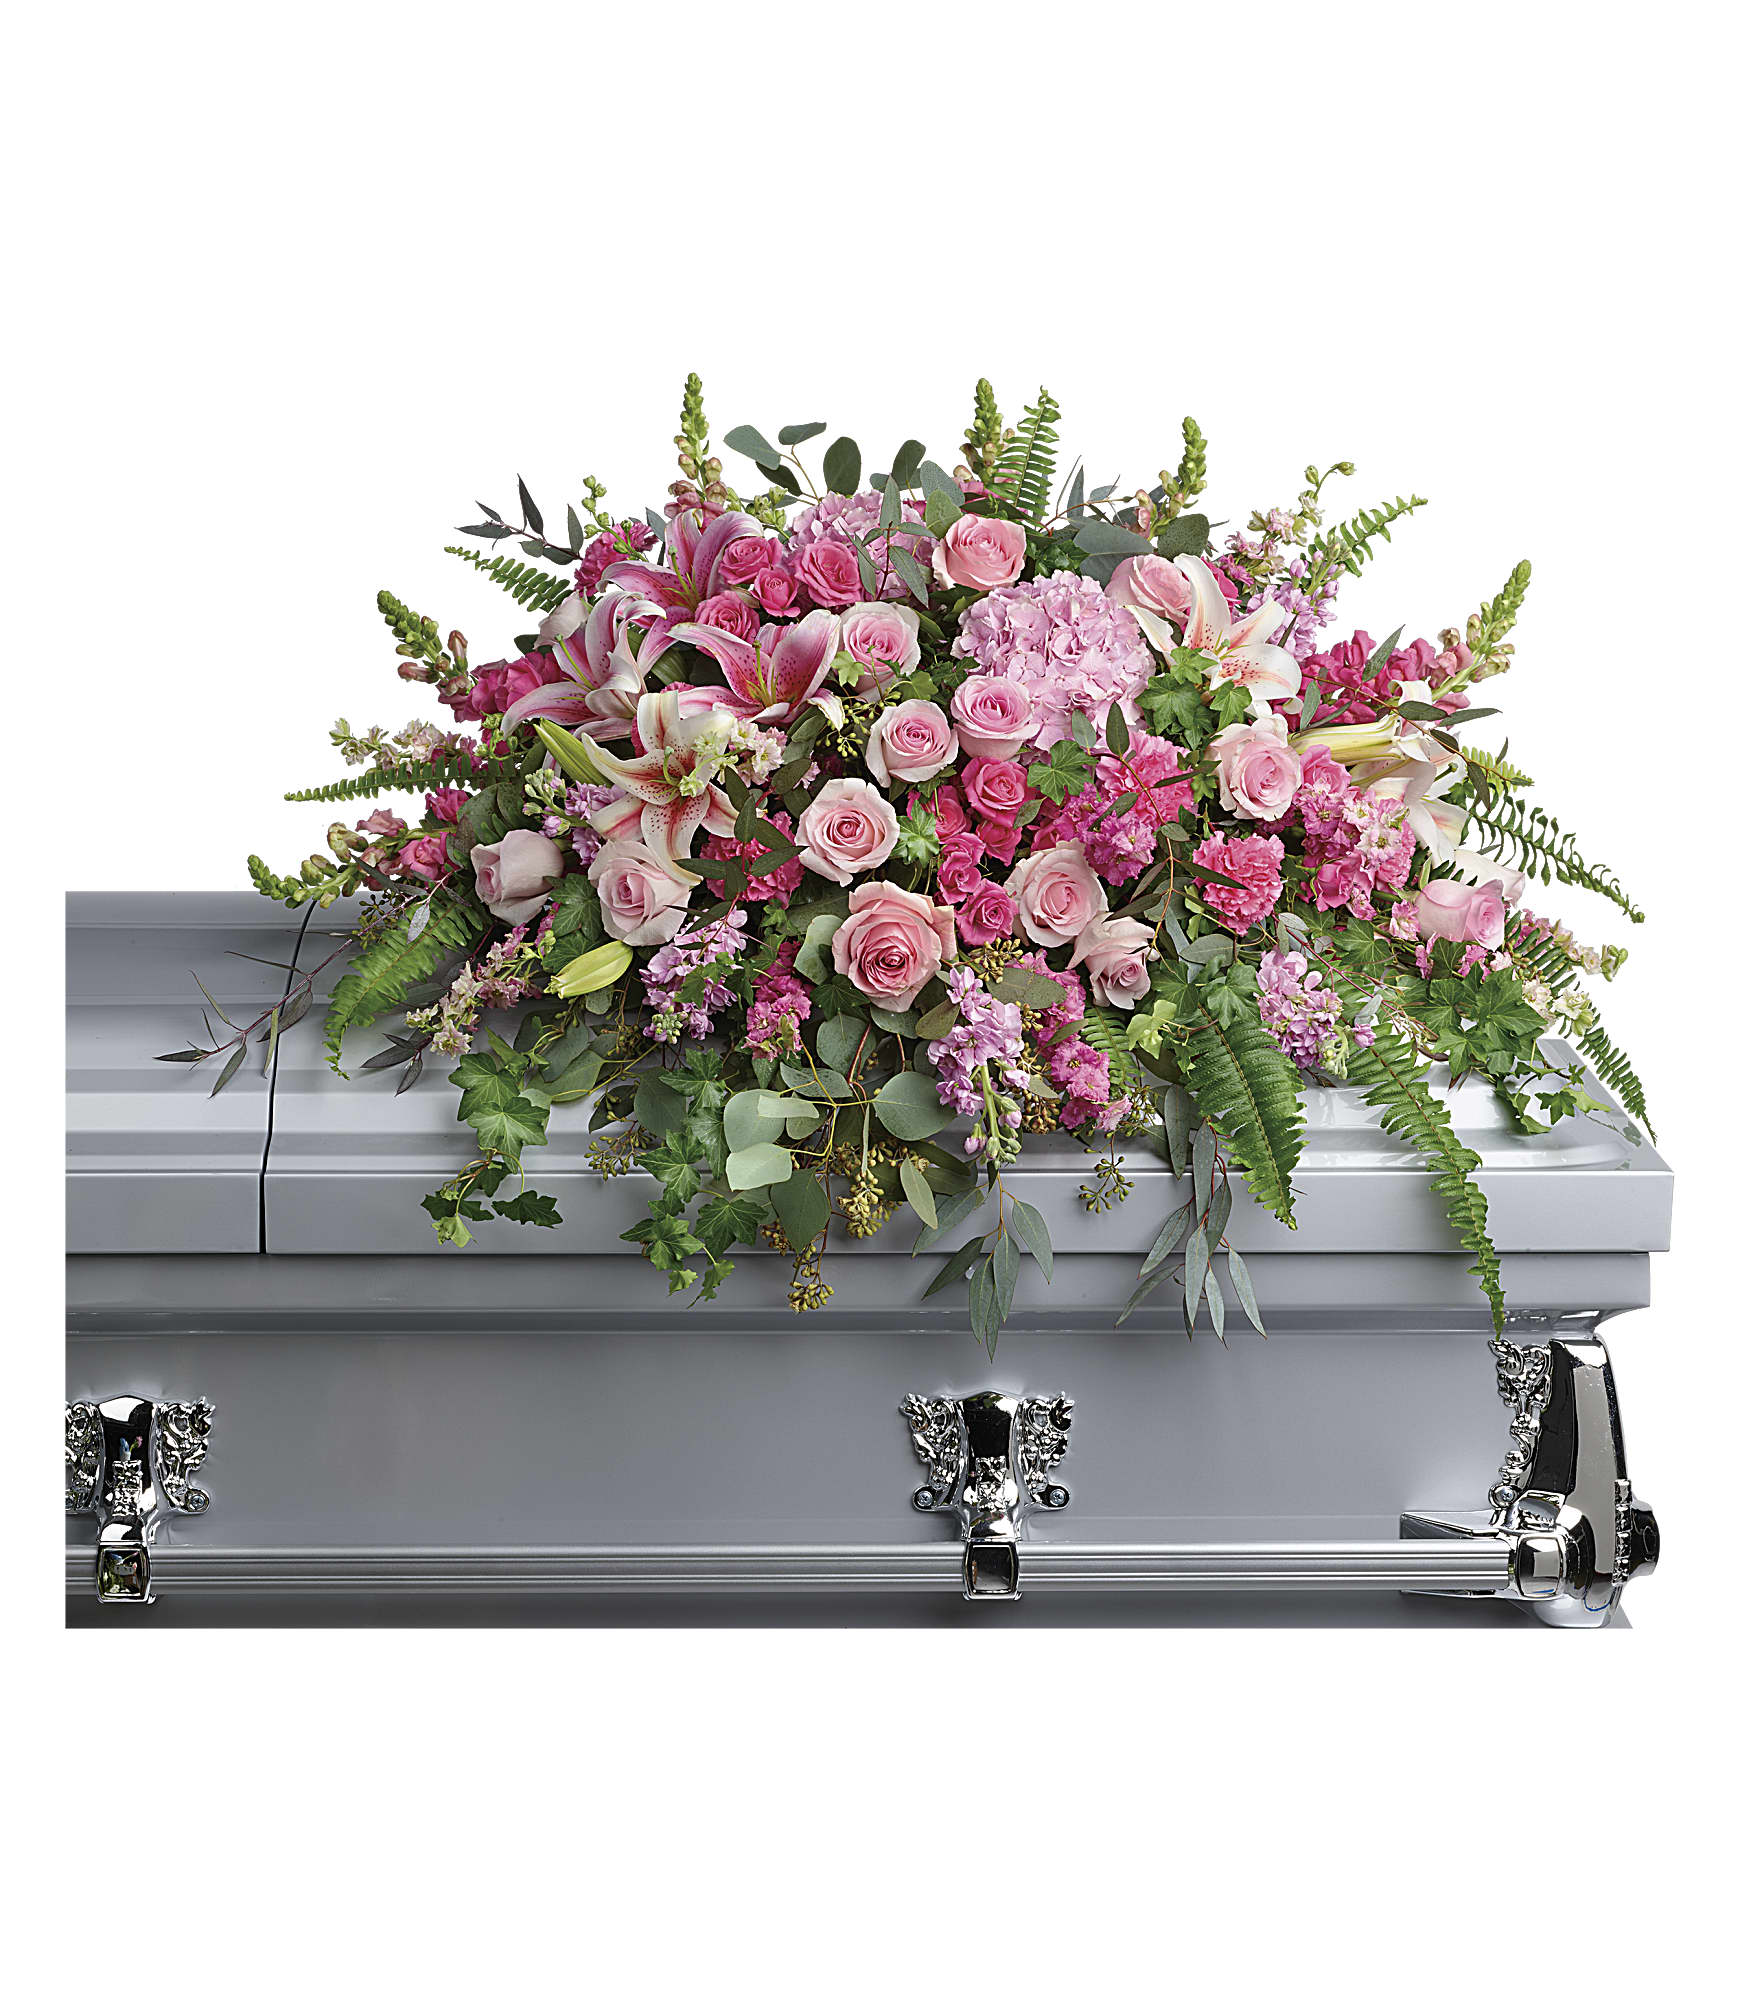 Beautiful Memories Casket Spray - With its mix of the softest and palest to it's most vibrant shades...pink holds a special place in our hearts, as does your loved one. T280-6A 